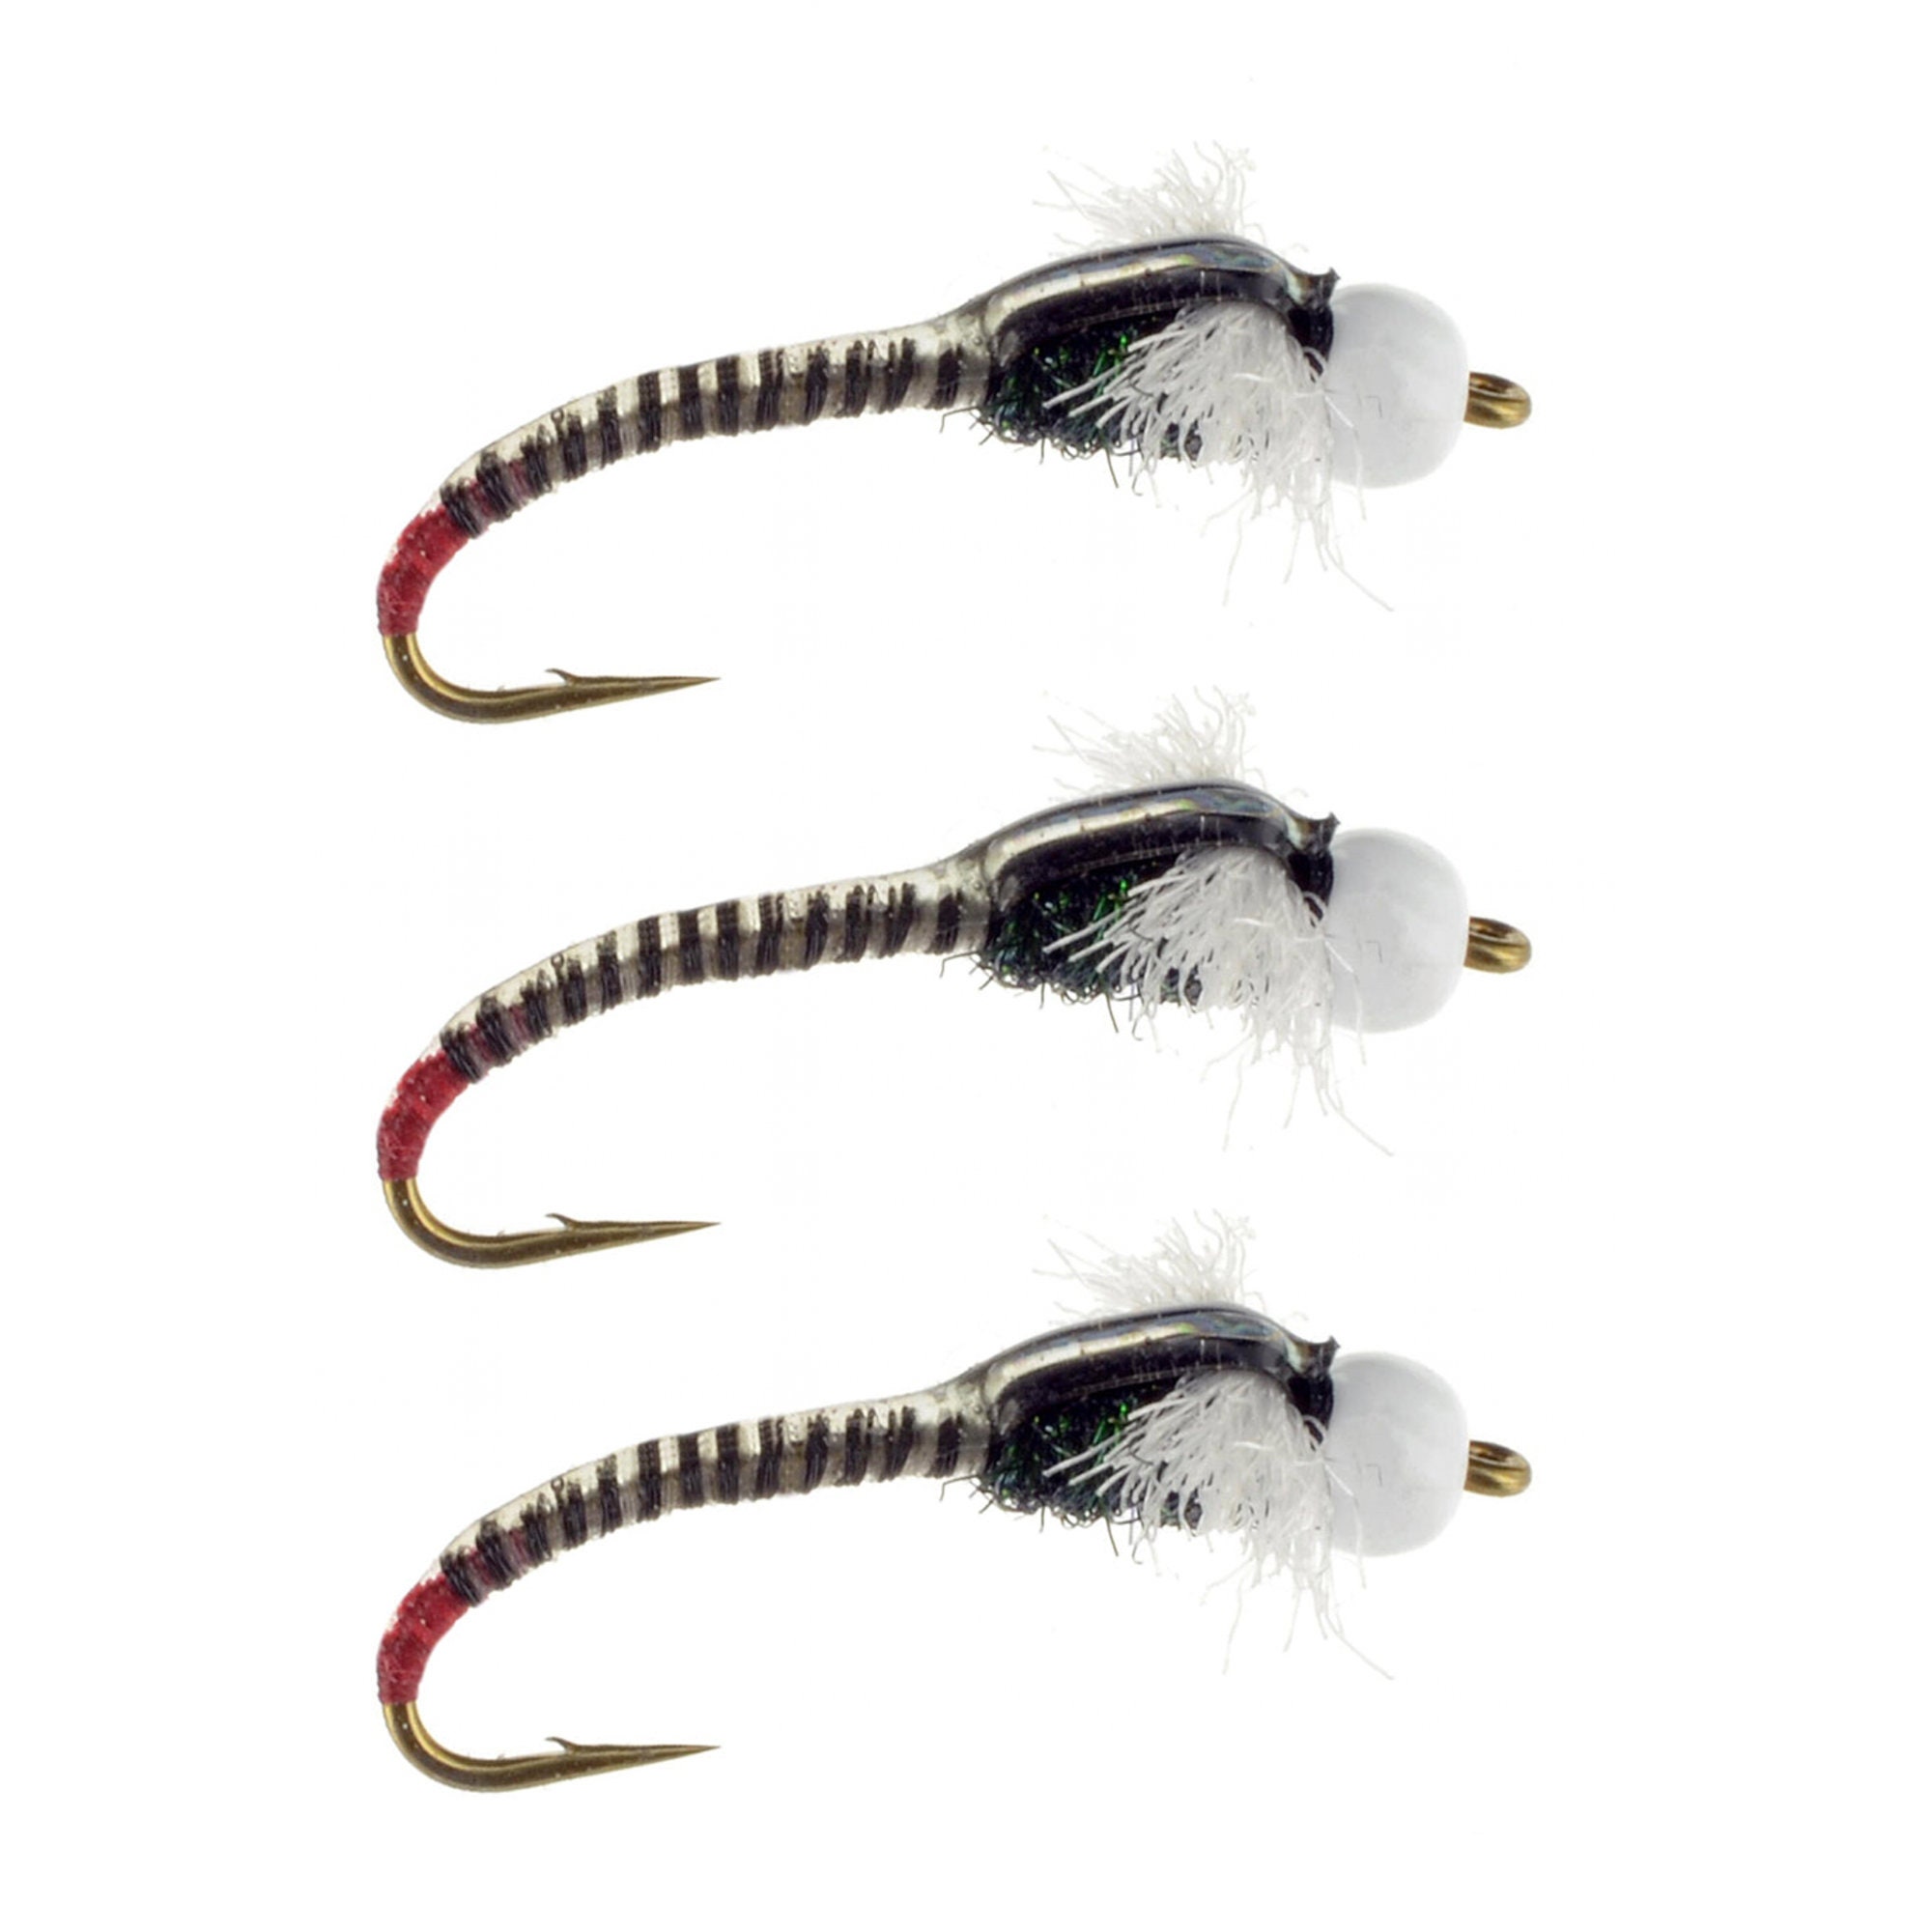 Midge and Emerger Flies Jumbo Juju Chironomid Fly Pattern Fly Fishing Flies  for Fly Fishing 3 Pack of Premium Trout Flies 